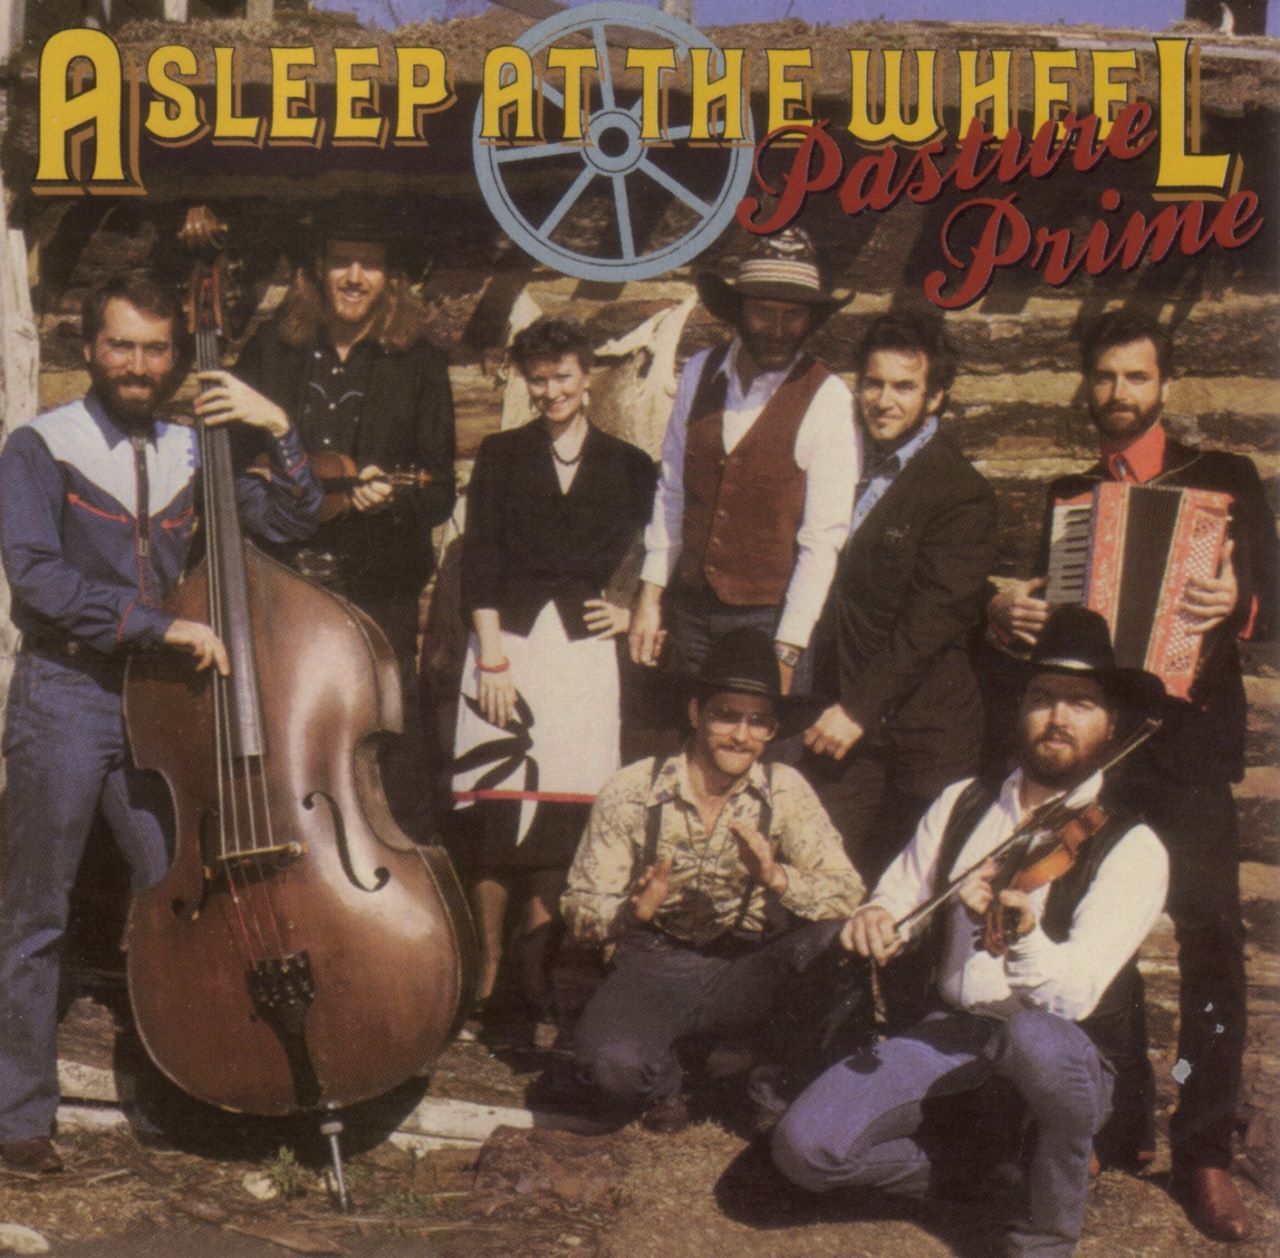 Asleep At The Wheel – Pasture Prime cover album